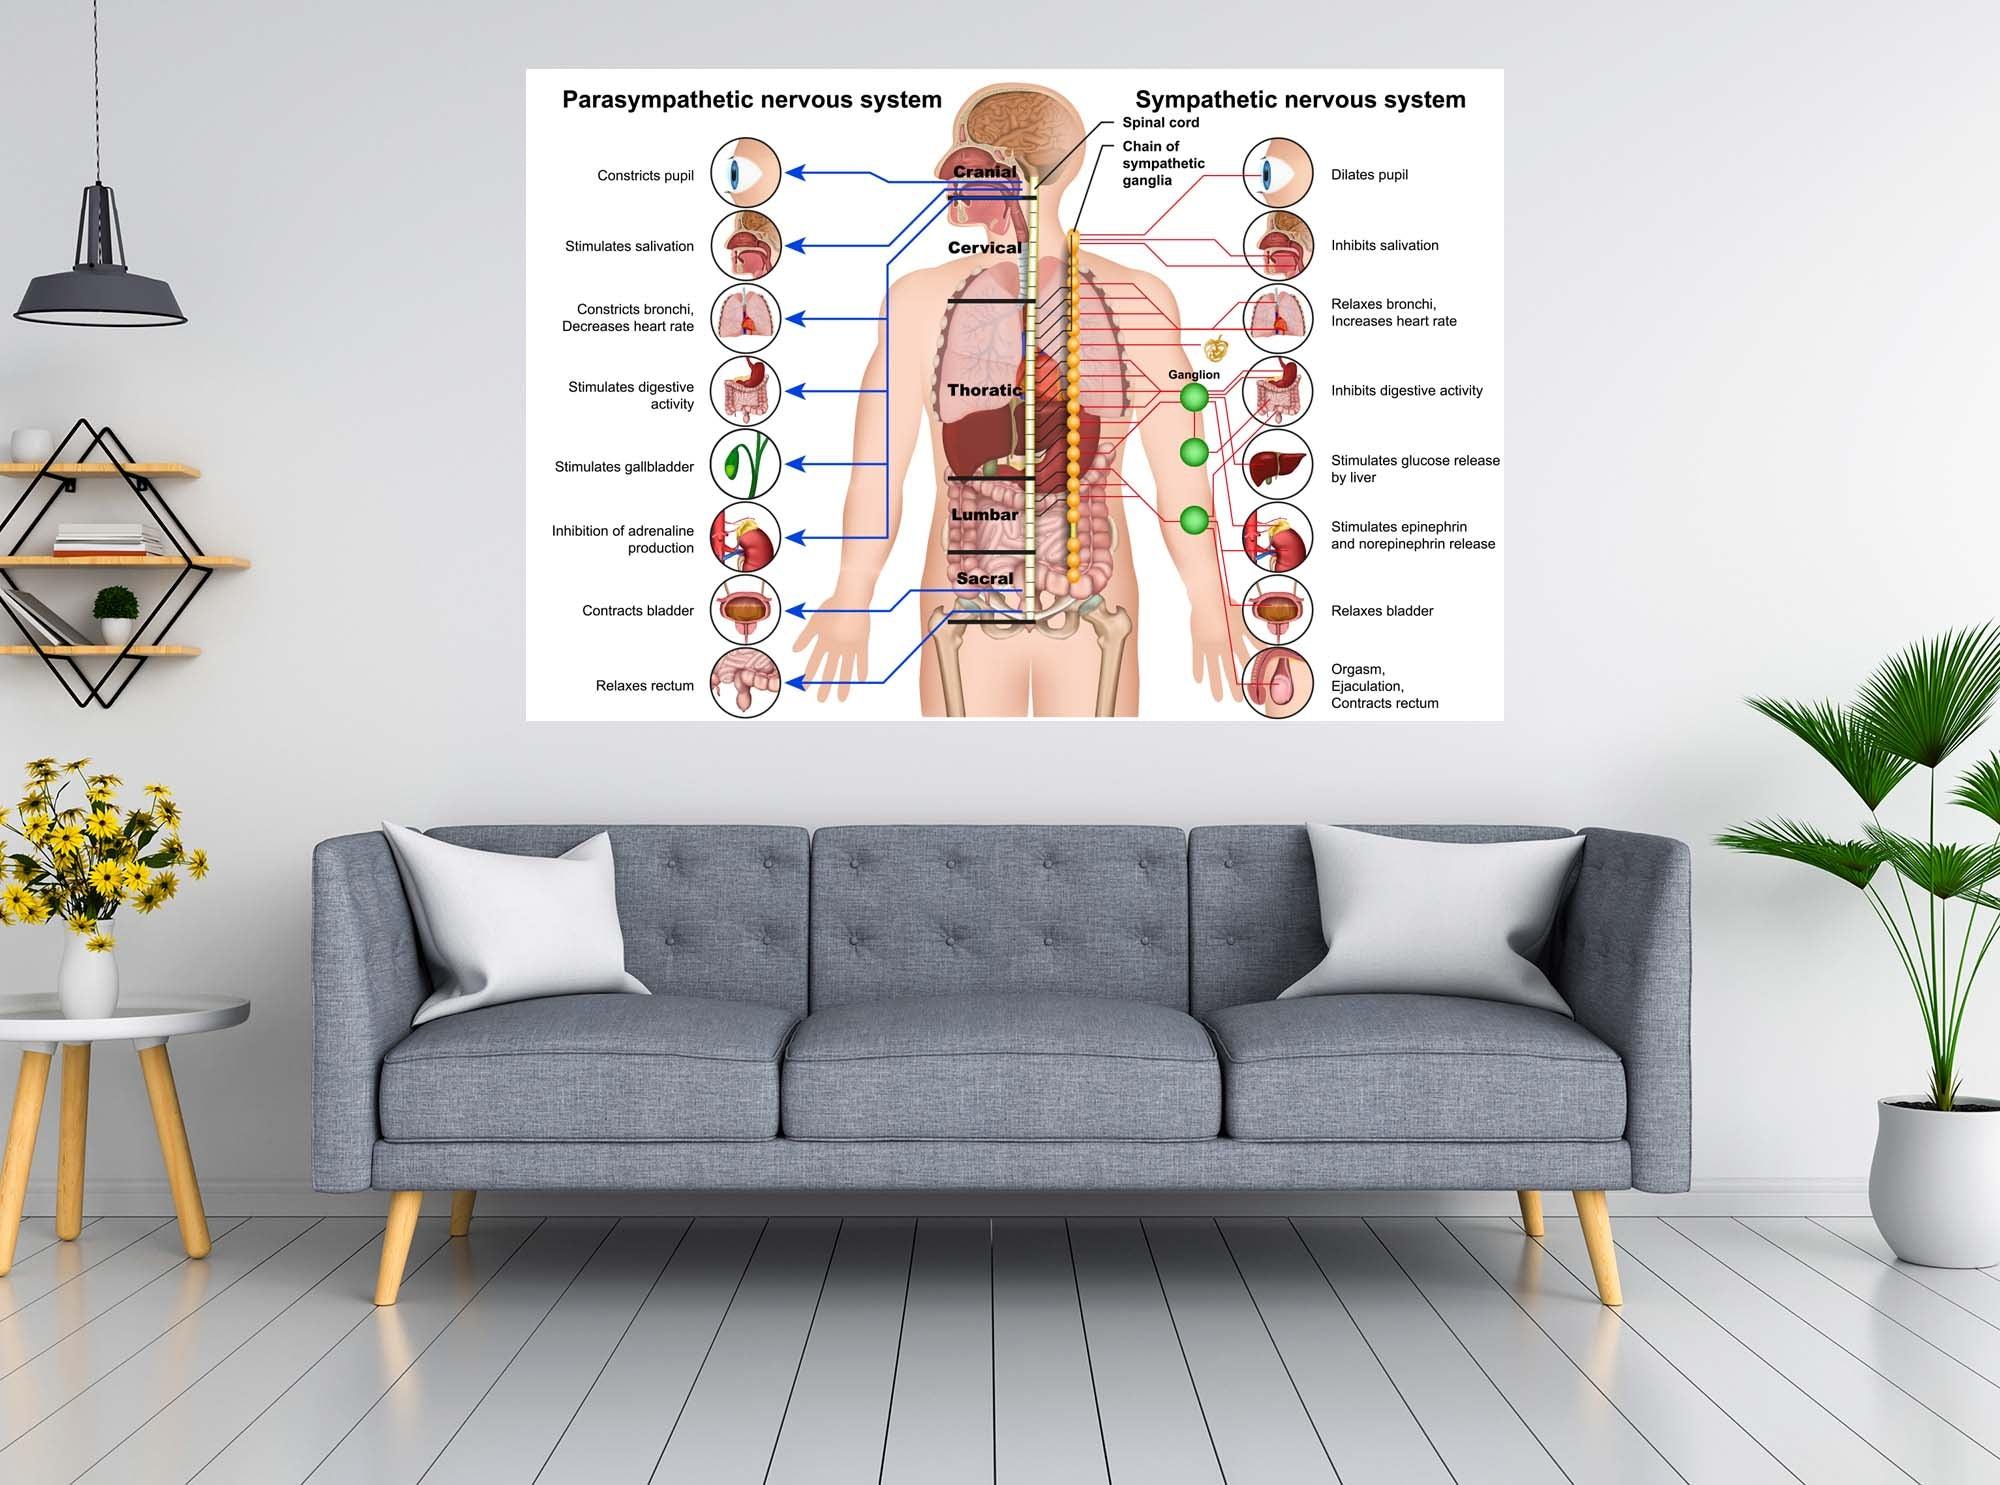 CoolWalls.ca stickers Parasympathetic Nervous System Wall Decal Diagram, Peel-N-Stick to the wall, Remove anytime Wall Decal Sticker